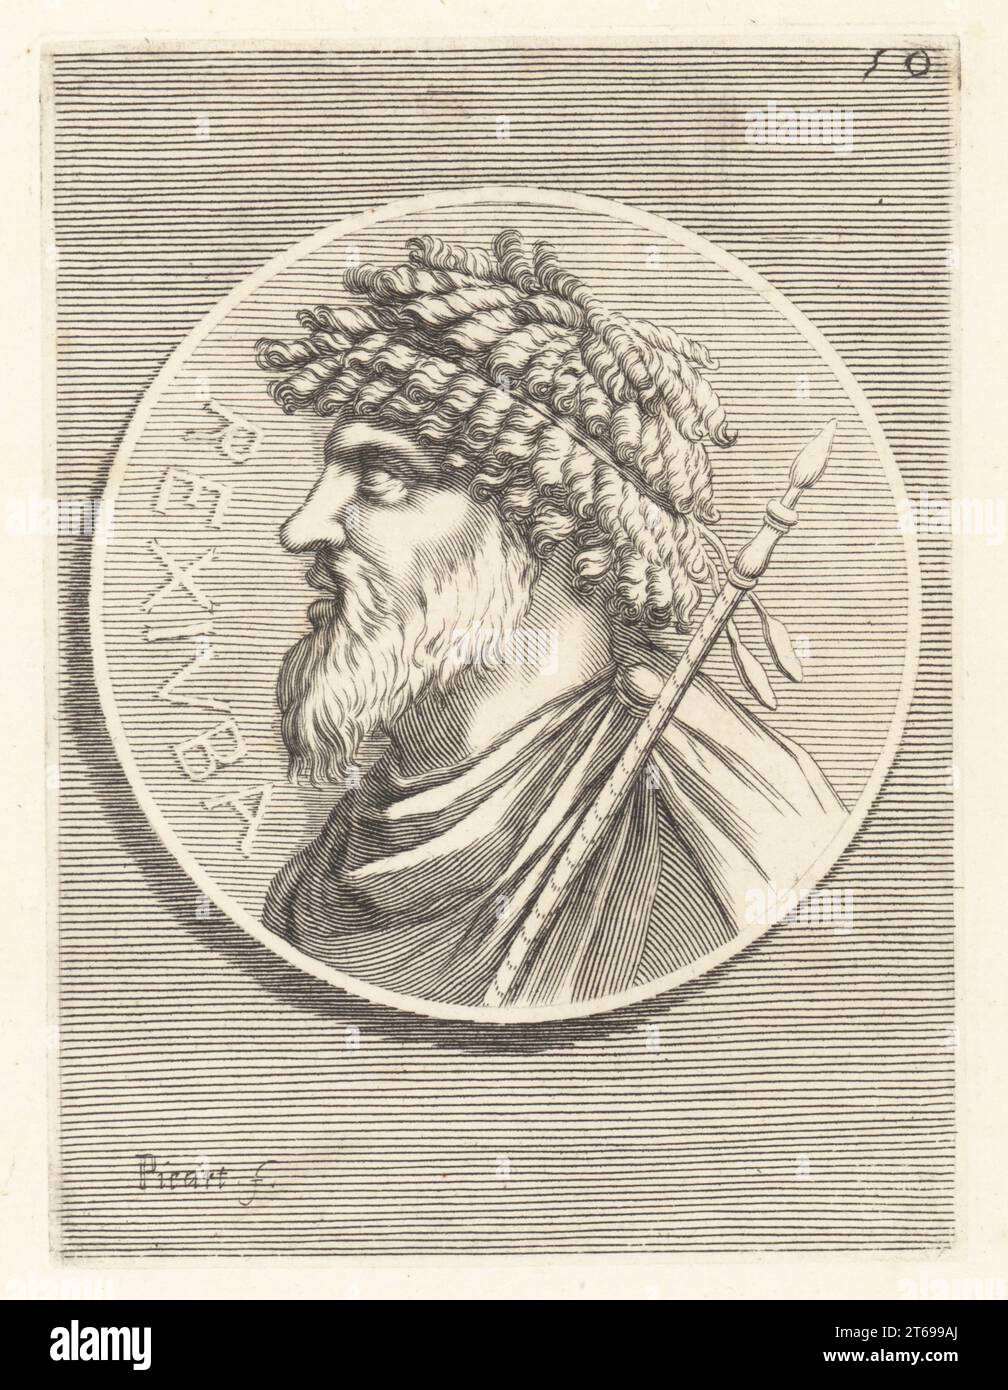 King Juba I of Numidia, c.85-46 BC, king of Numidia (reigned 60-46 BC). He was the son and successor to Hiempsal II. With beard and curly hair, mantle and sceptre. From a silver coin. Rex Iuba. Copperplate engraving by Etienne Picart after Giovanni Angelo Canini from Iconografia, cioe disegni d'imagini de famosissimi monarchi, regi, filososi, poeti ed oratori dell' Antichita, Drawings of images of famous monarchs, kings, philosophers, poets and orators of Antiquity, Ignatio deLazari, Rome, 1699. Stock Photo